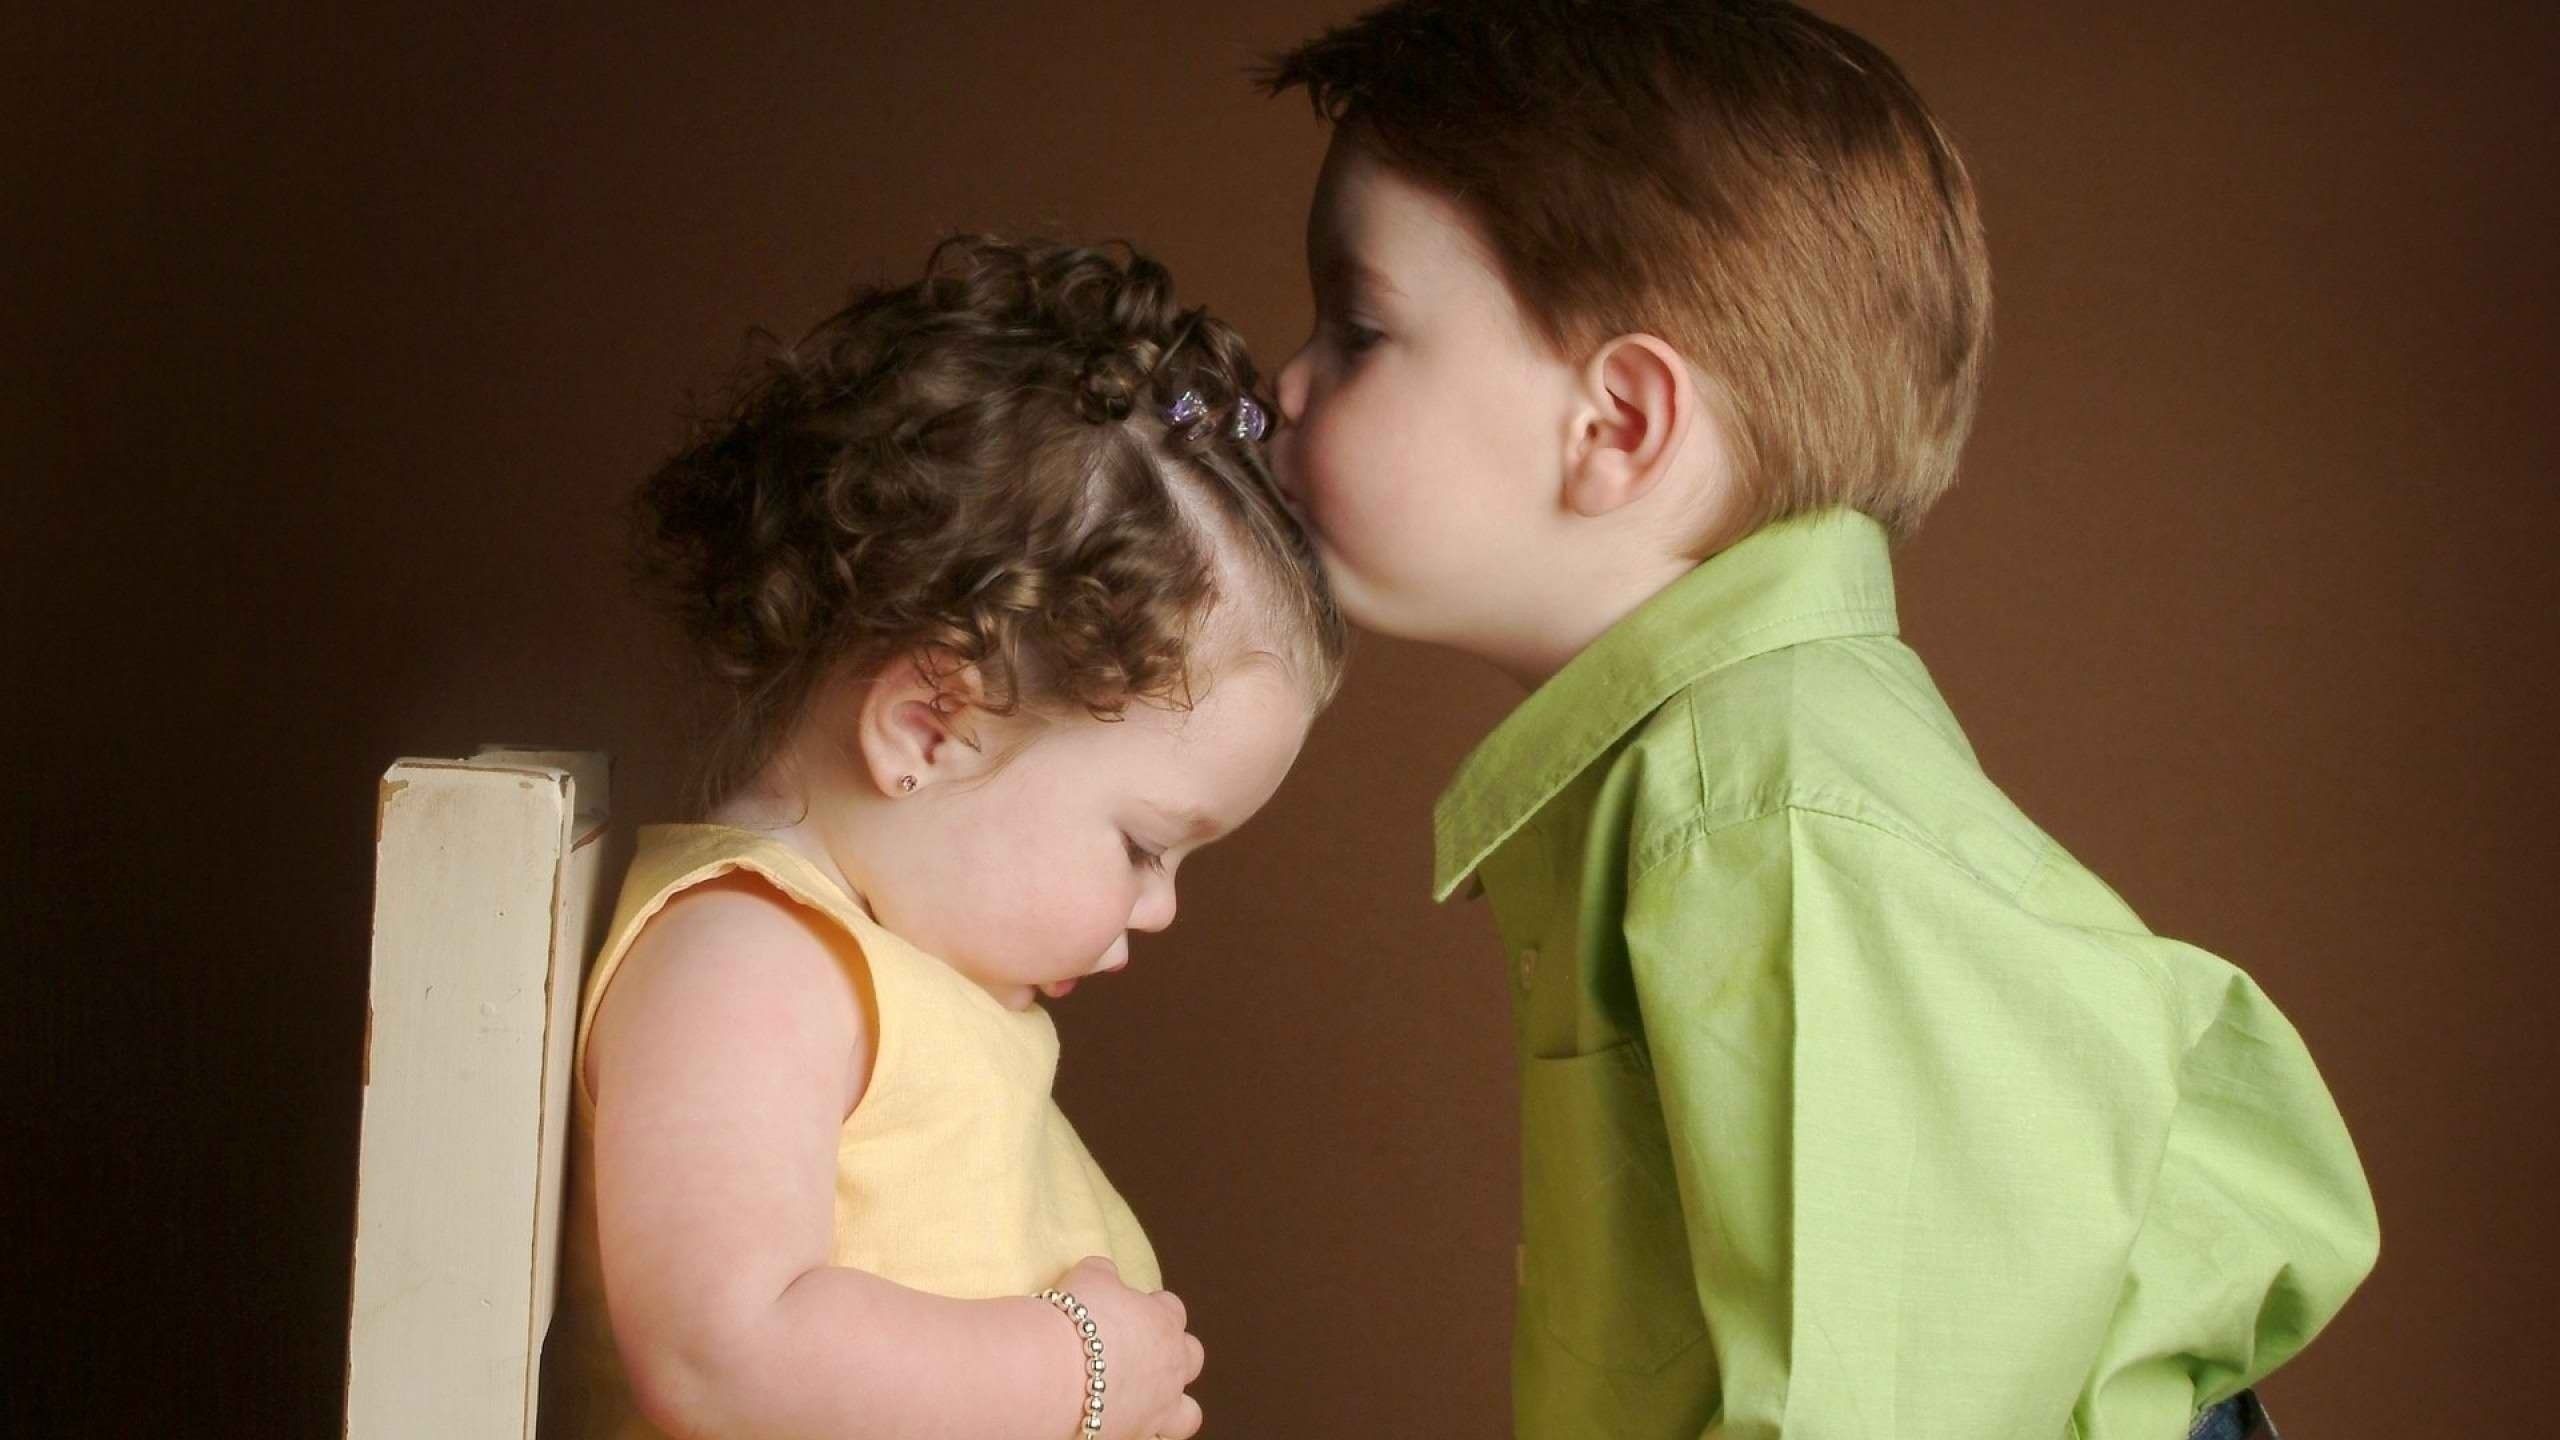 Cute Baby Love Couple Wallpaper Cute Baby Couple In And Sister Image HD